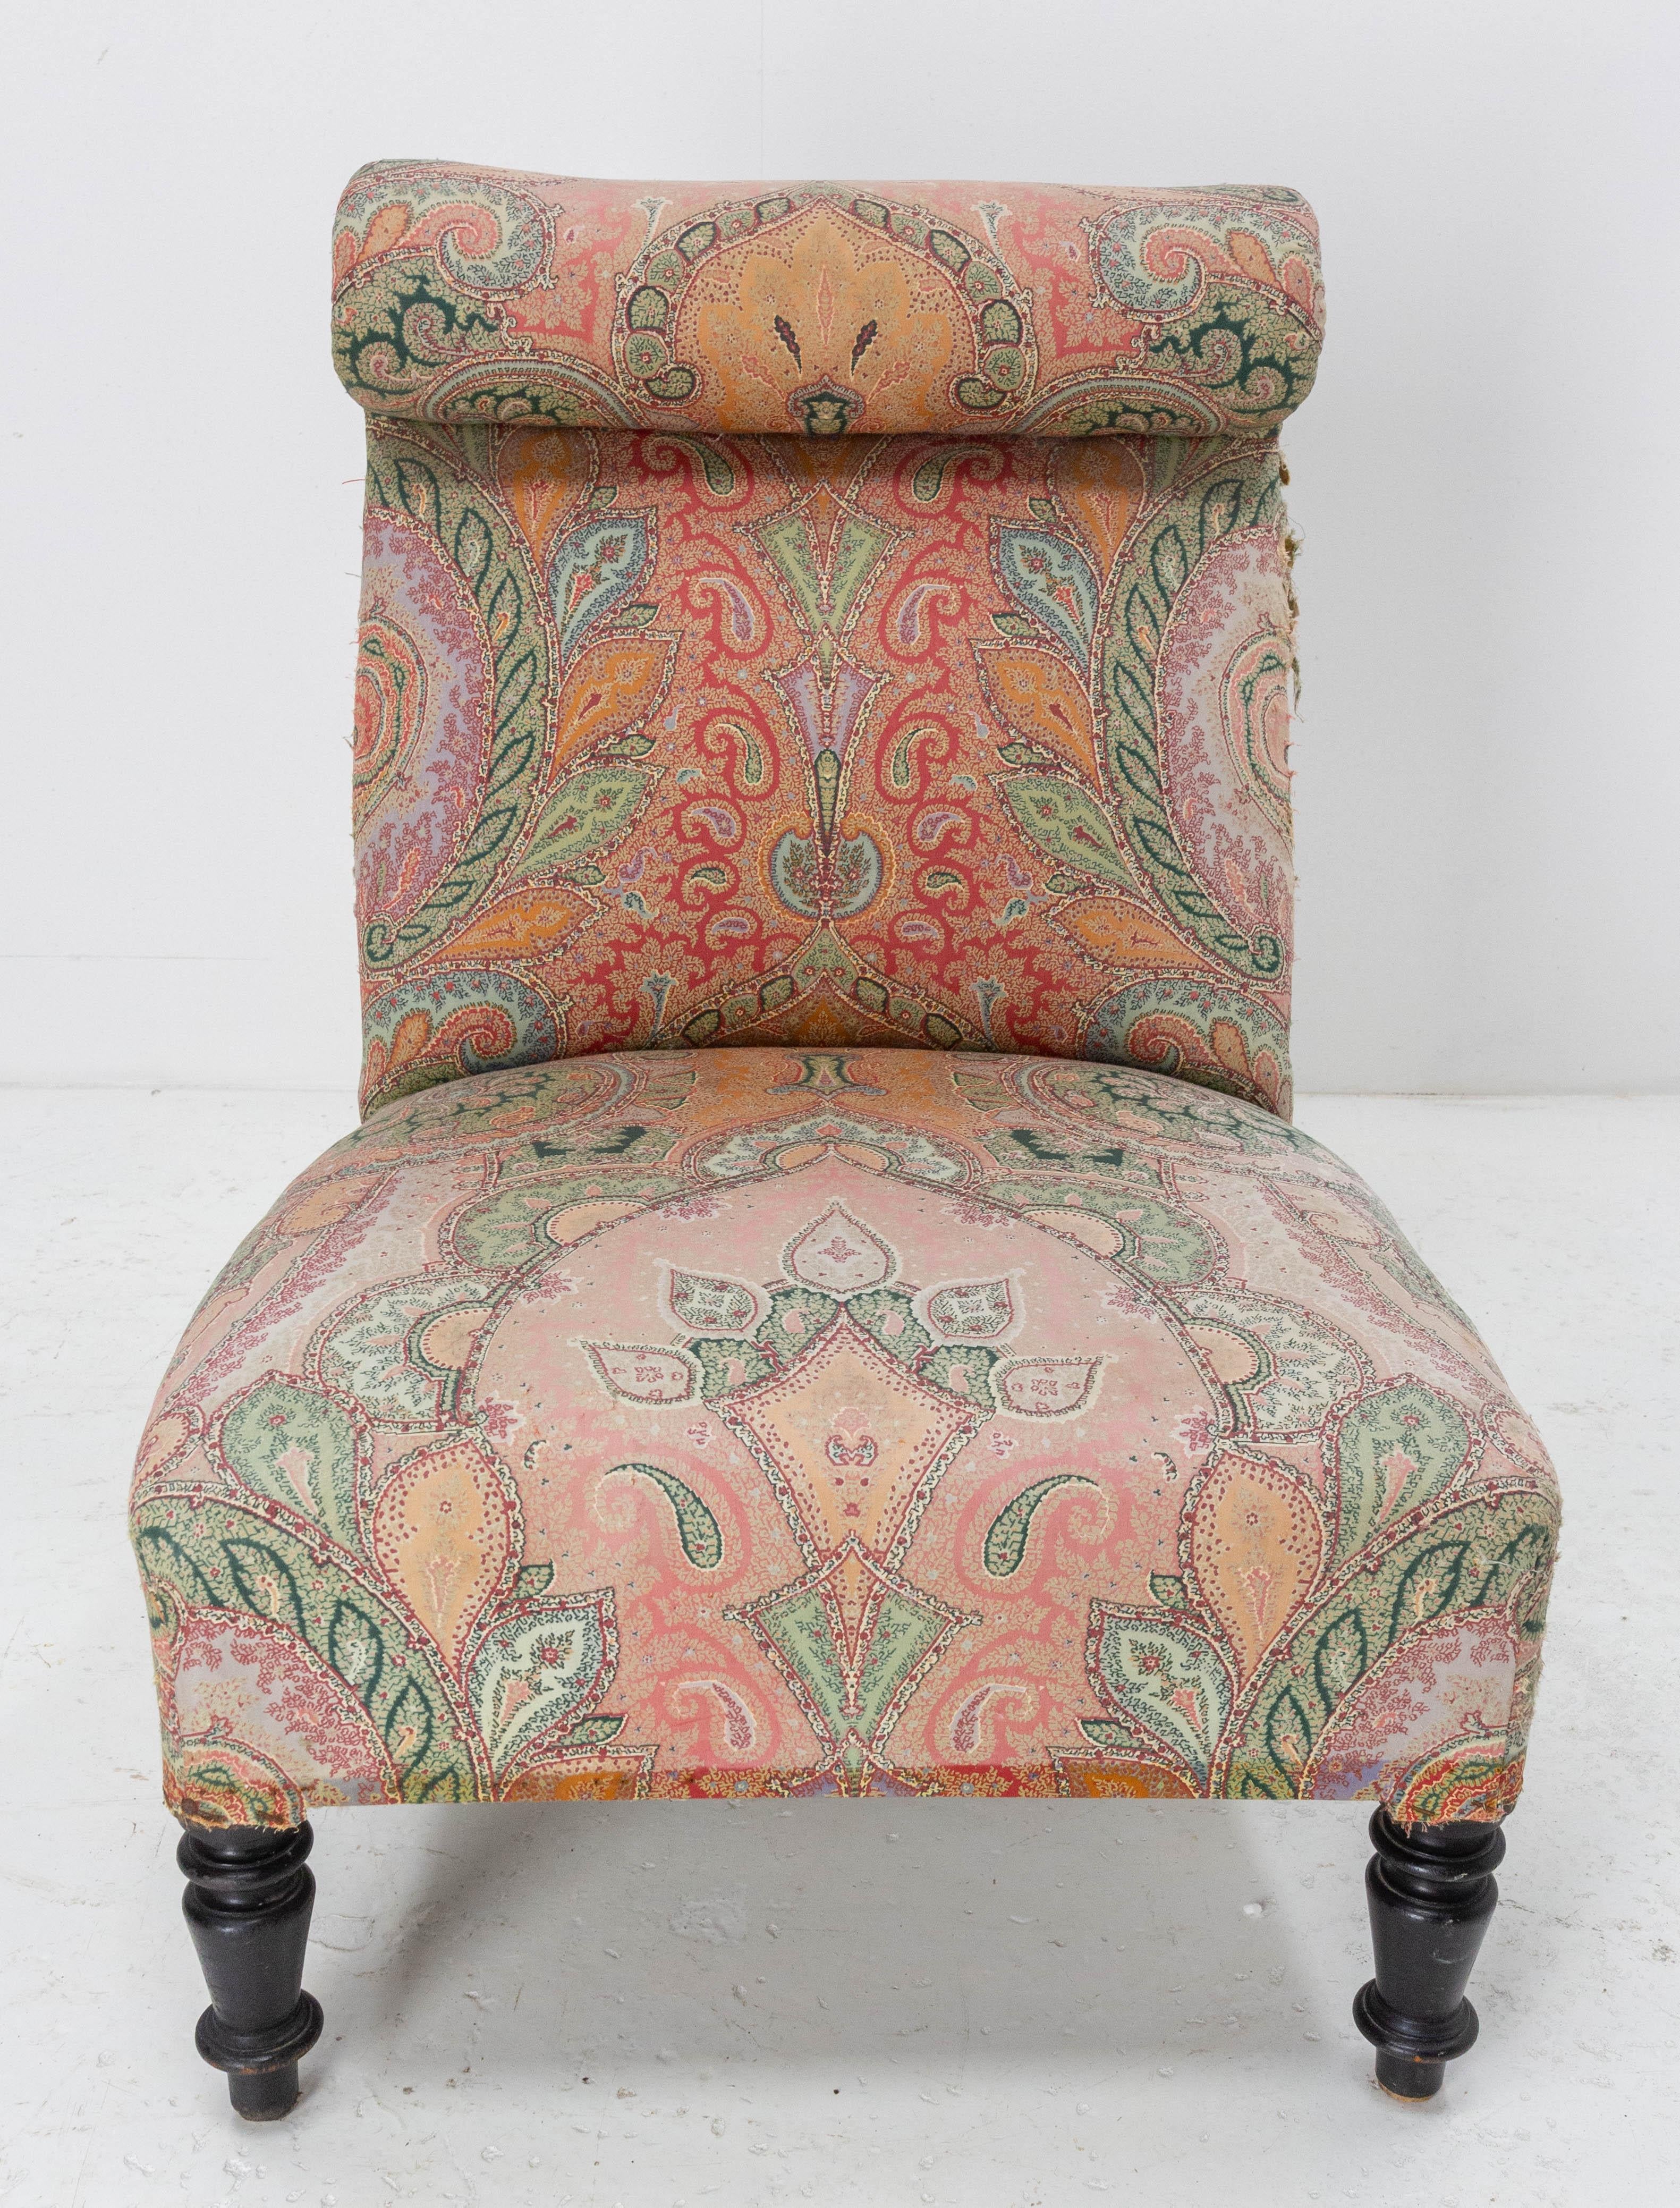 Chauffeuse French Napoleon III, circa 1890.
The feets are in ebonized wood,
Antique, 19th century.
It can be recovered with the fabric of your choice to suit your interior.
Sound and solid, the upholstery is good.
You can pair this chauffeuse